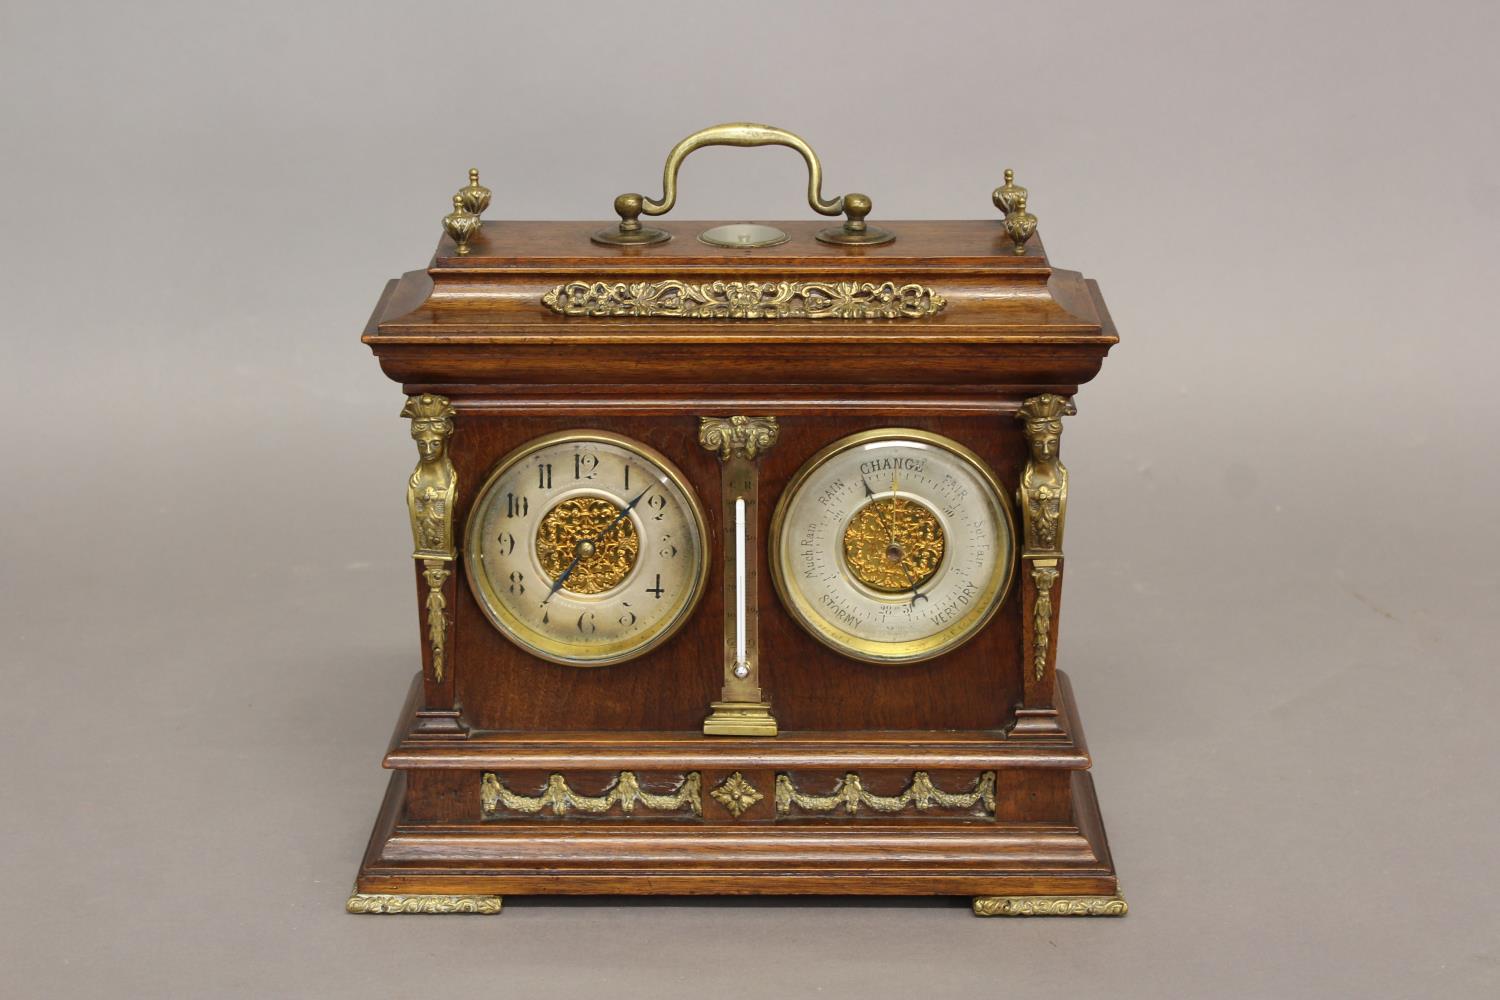 A PRESENTATION CLOCK/BAROMETER BY E. SERMON, TORQUAY. The walnut case with carrying handle above a